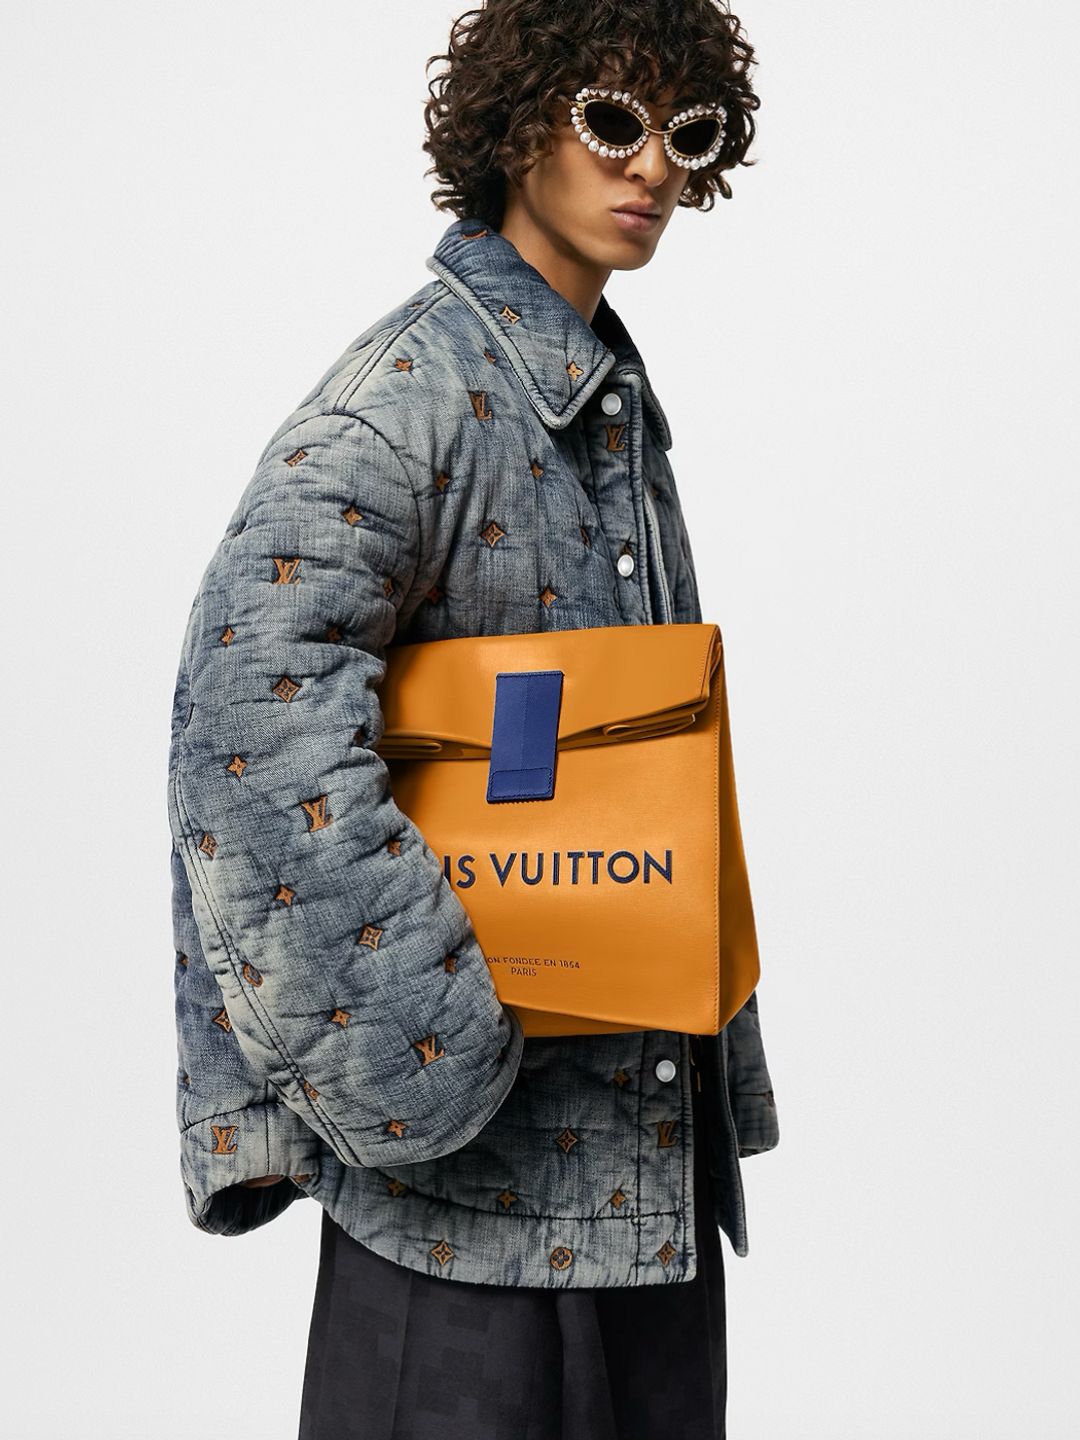 A model wearing a oversized denim jacket poses with the Louis Vuitton leather sandwhich bag